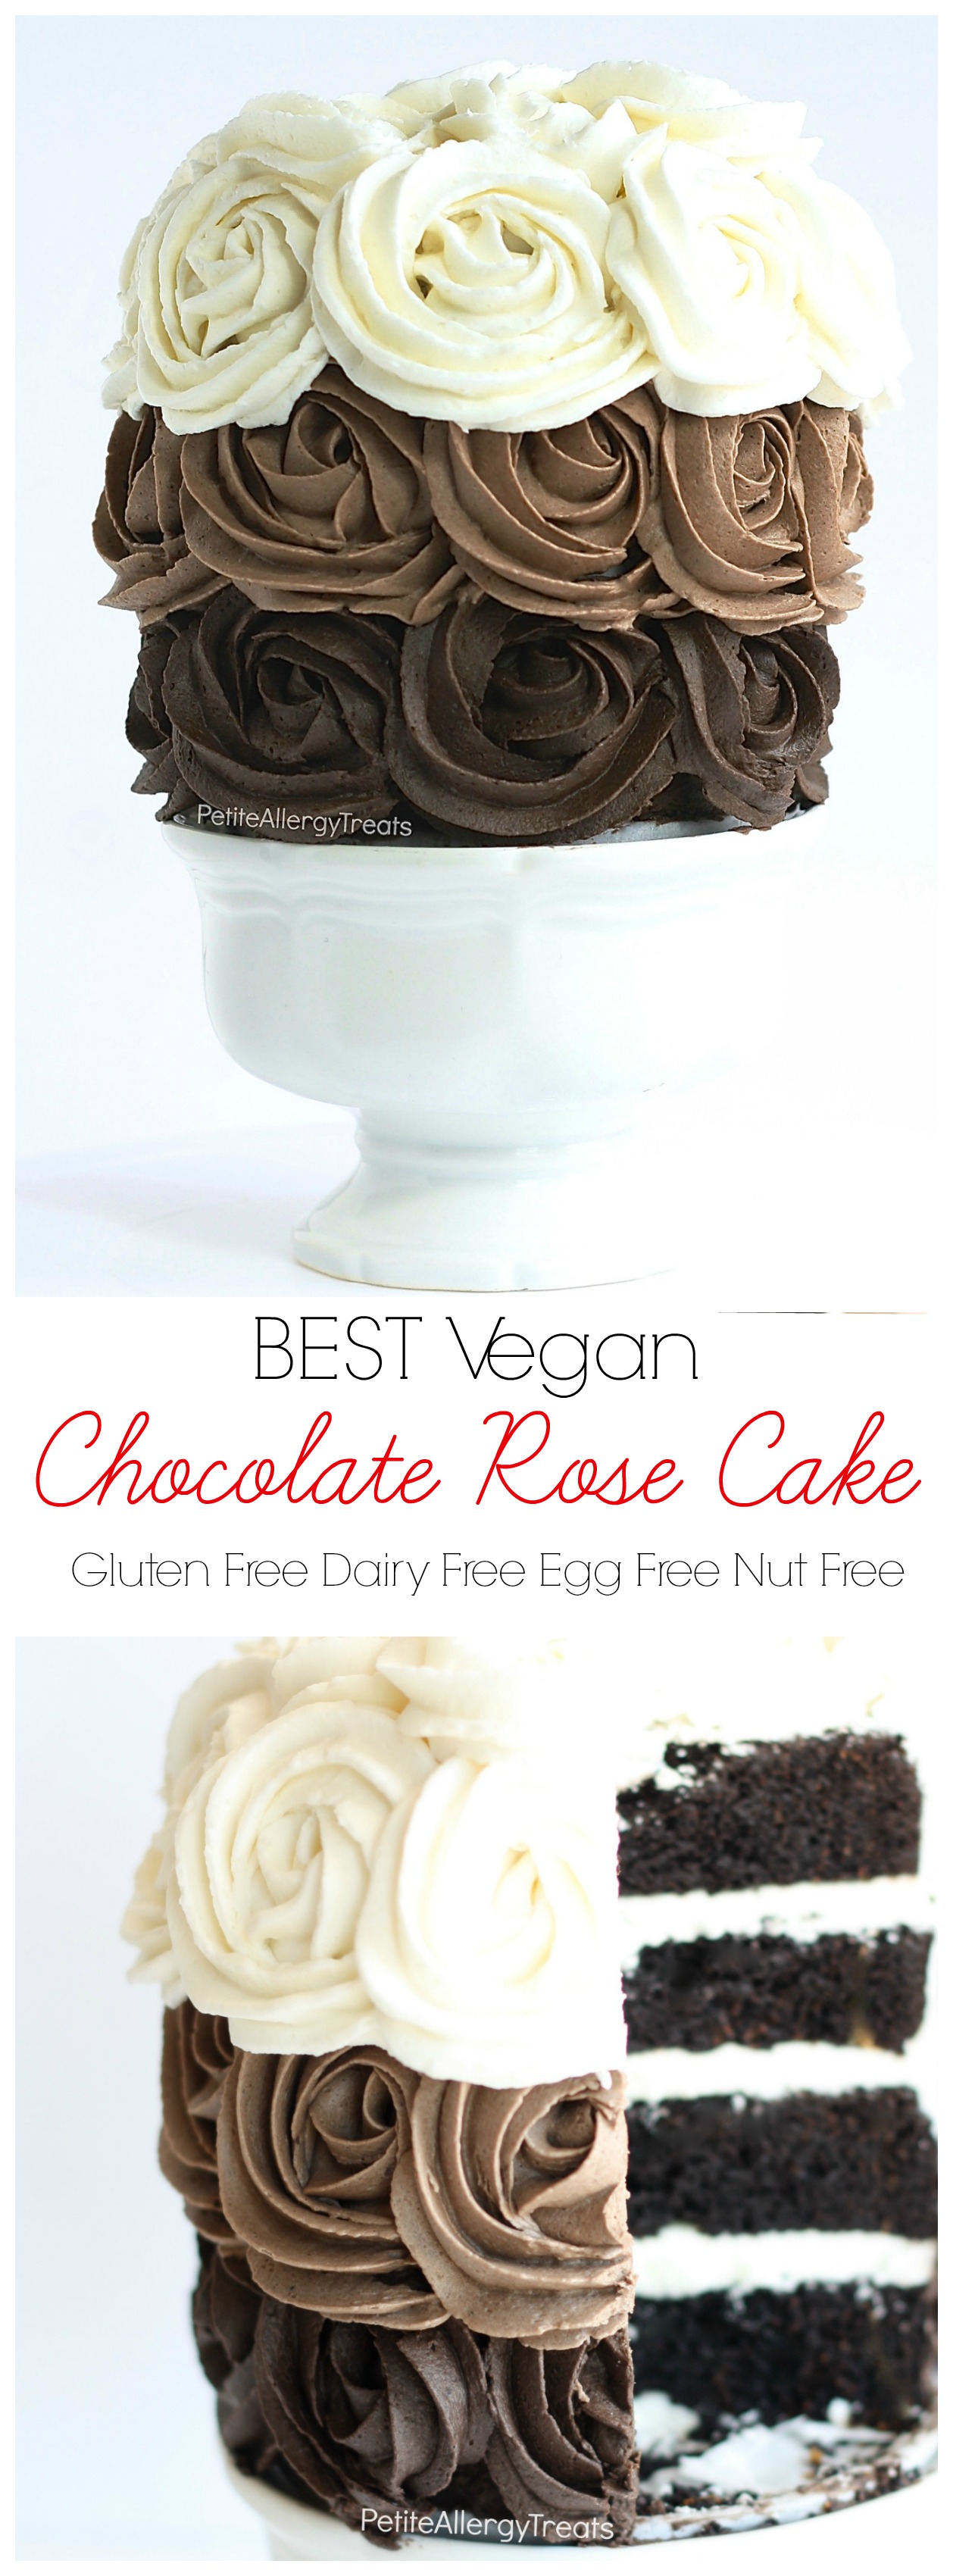 Best Gluten Free Chocolate Cake recipe (gluten free vegan)-Gluten Free Chocolate Cake recipe (vegan)- Gorgeous dairy free roses adorn this decadent chocolate cake. Food allergy friendly- egg free soy free nut free #EatFreely #ad